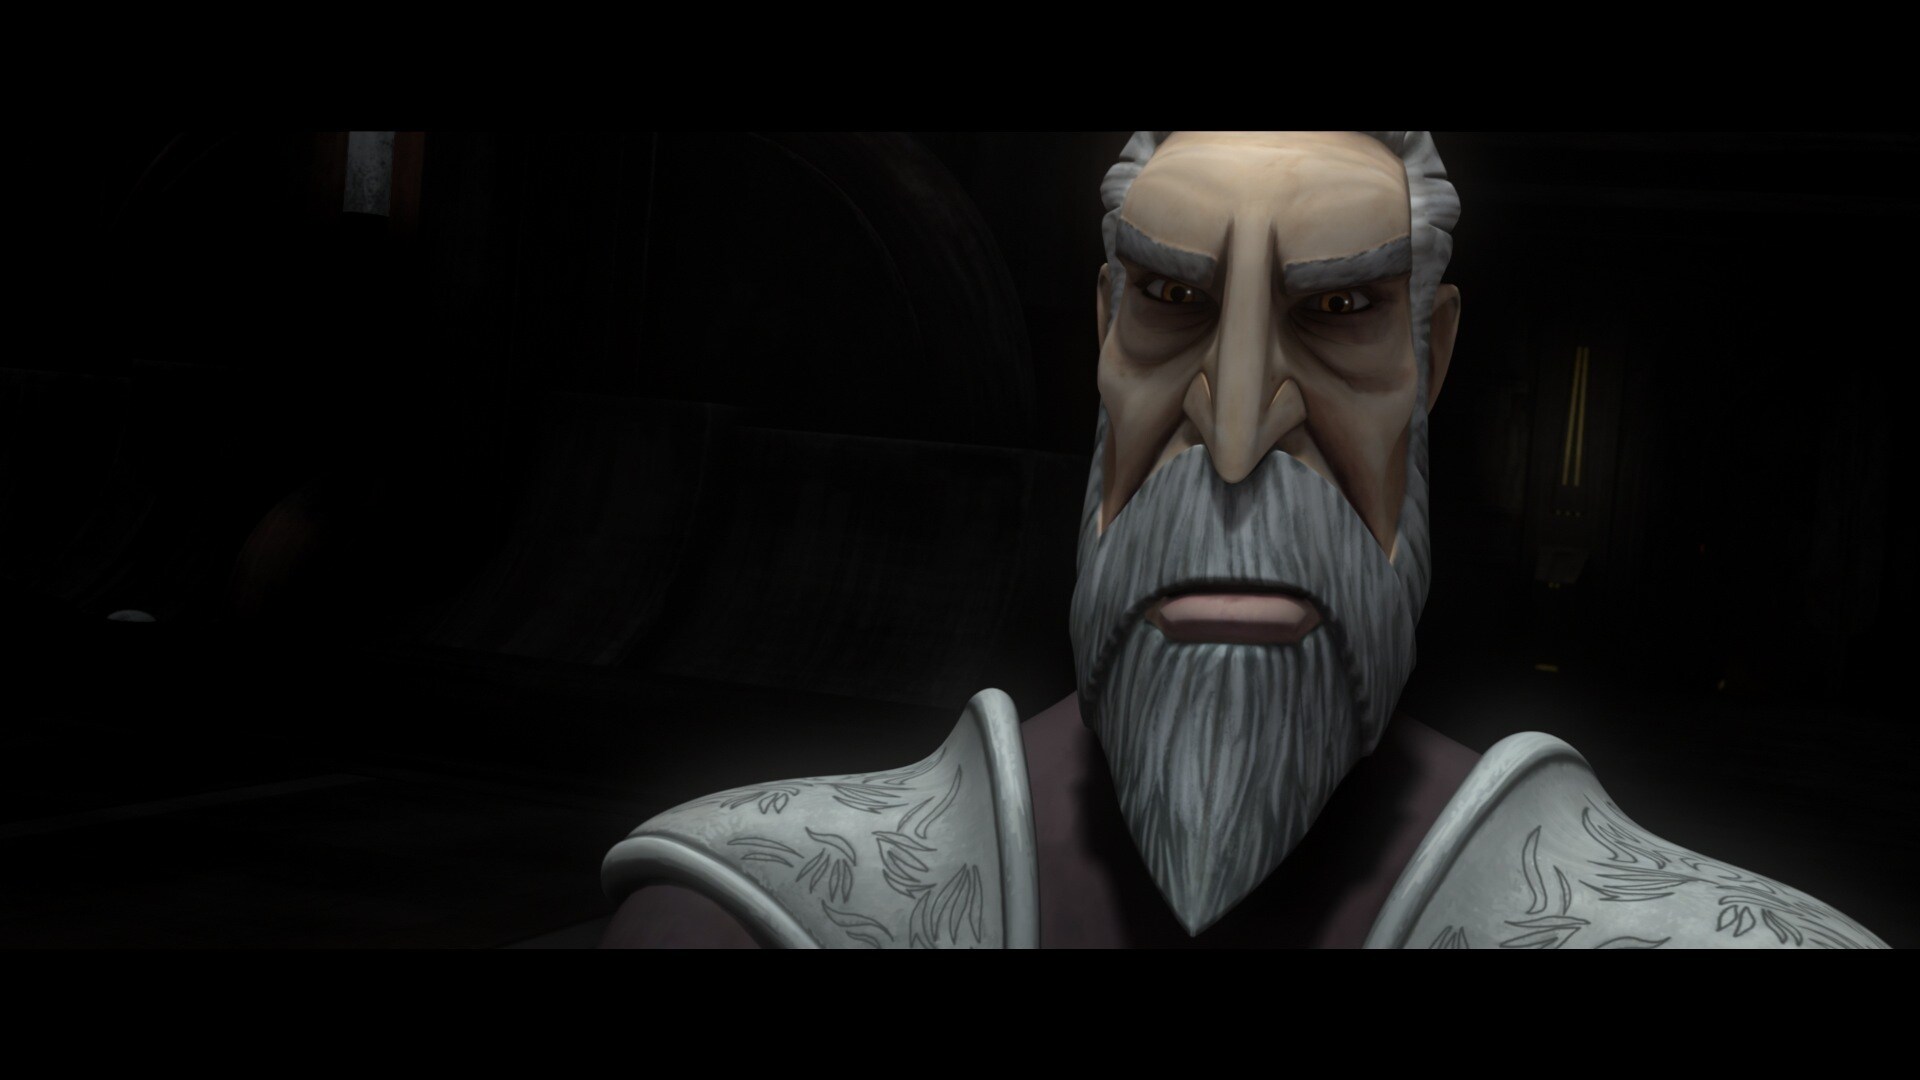 On Coruscant, in a ceremonial chamber lined with statues, Sidious leads Dooku to a sacrificial al...